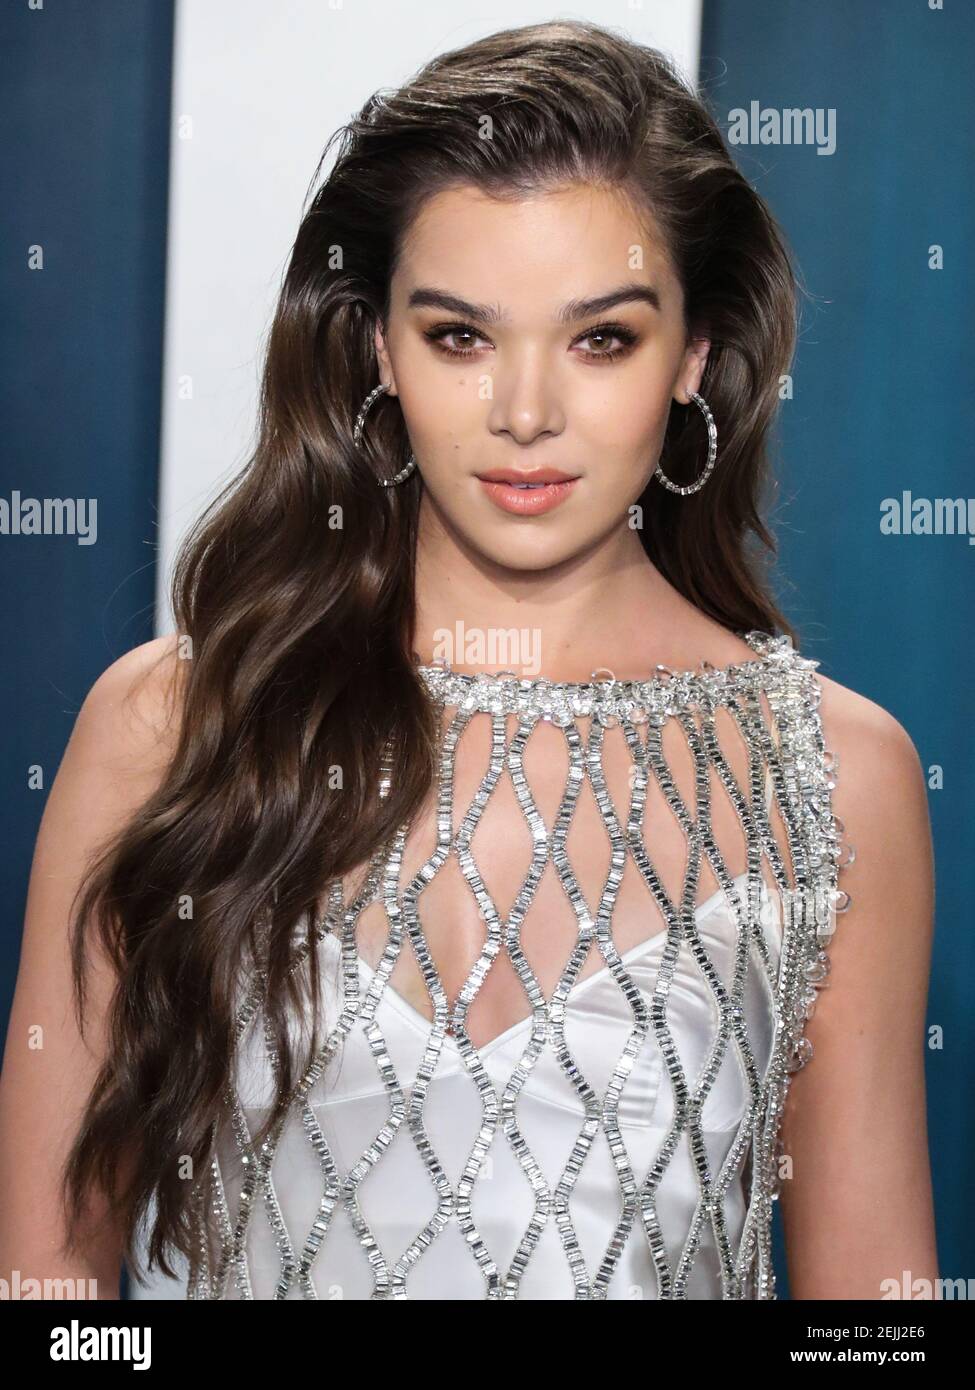 Beverly Hills Los Angeles California Usa February 09 Actresssinger Hailee Steinfeld 6680